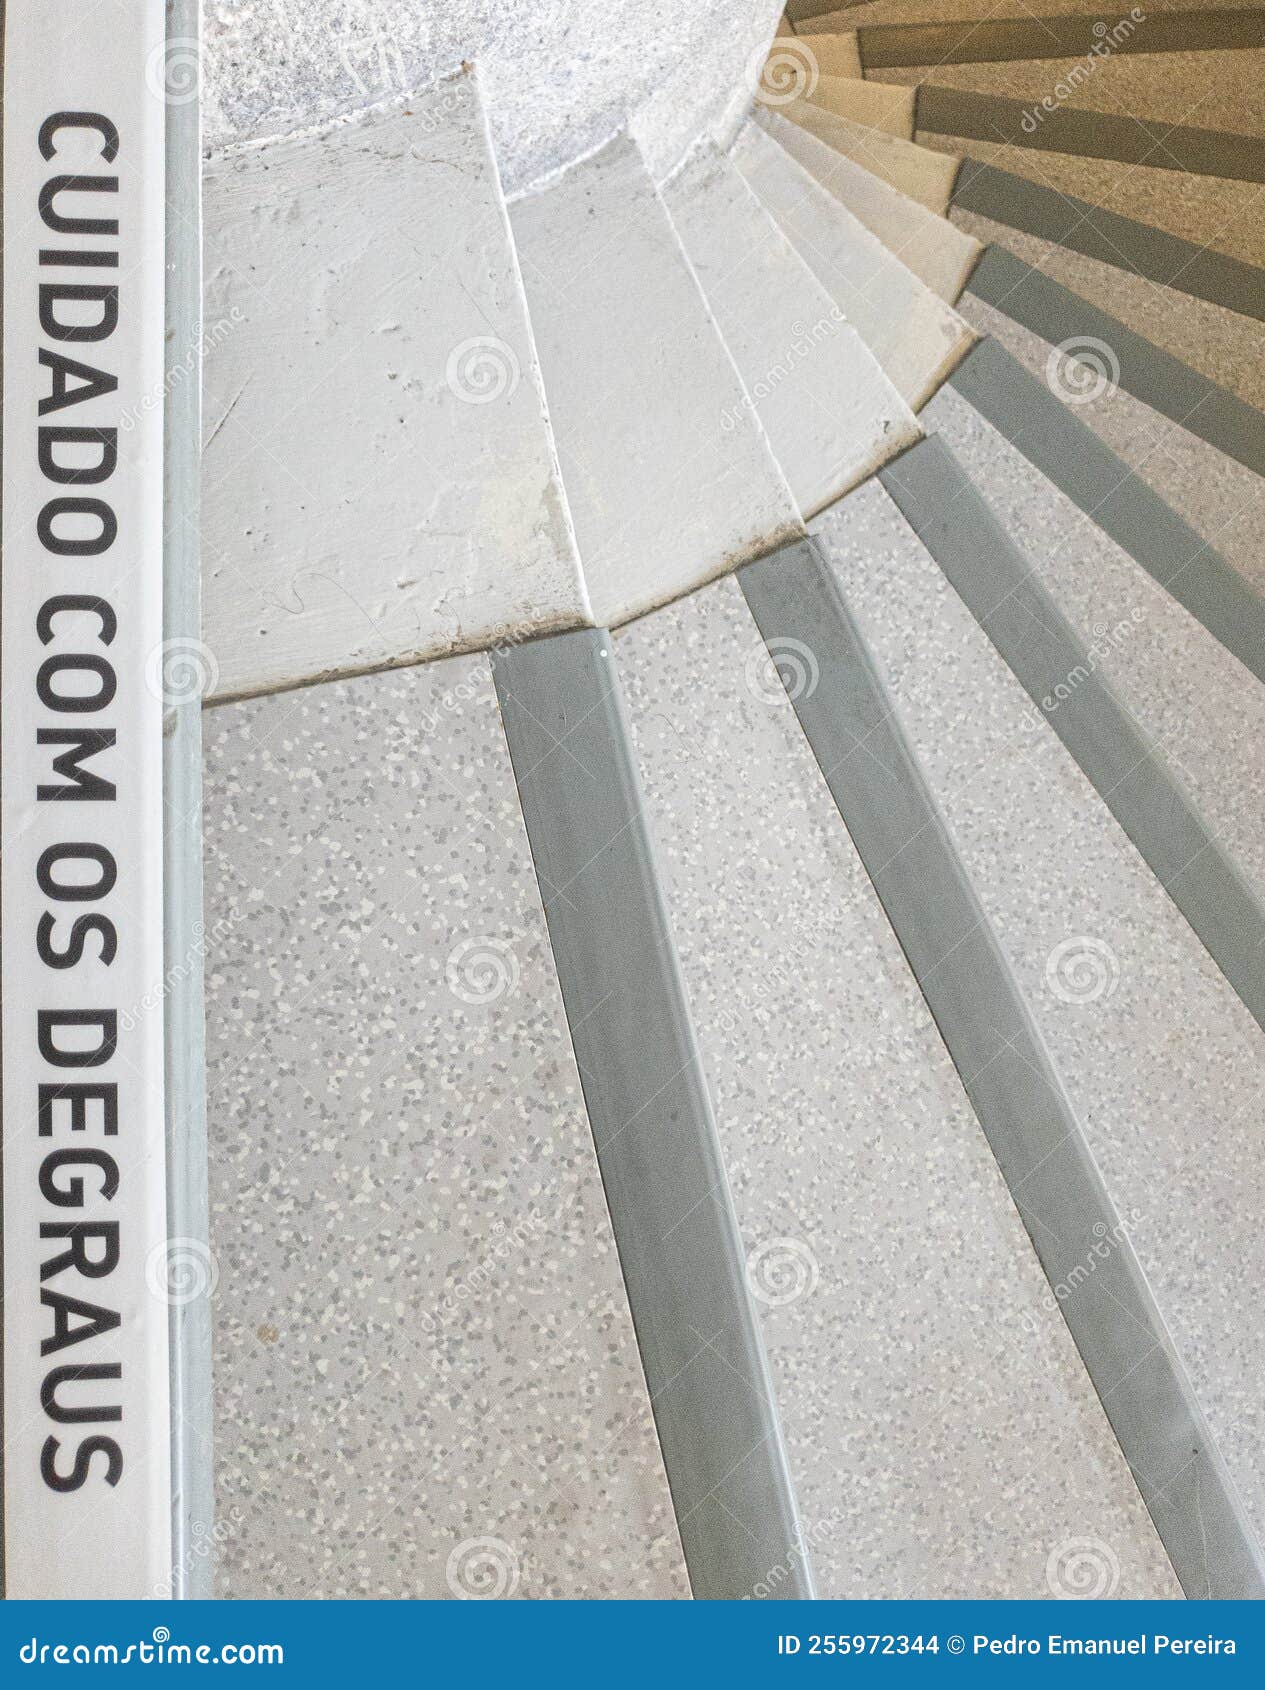 spiral stairs with the warning phrase written in portuguese, "cuidado com os degraus".